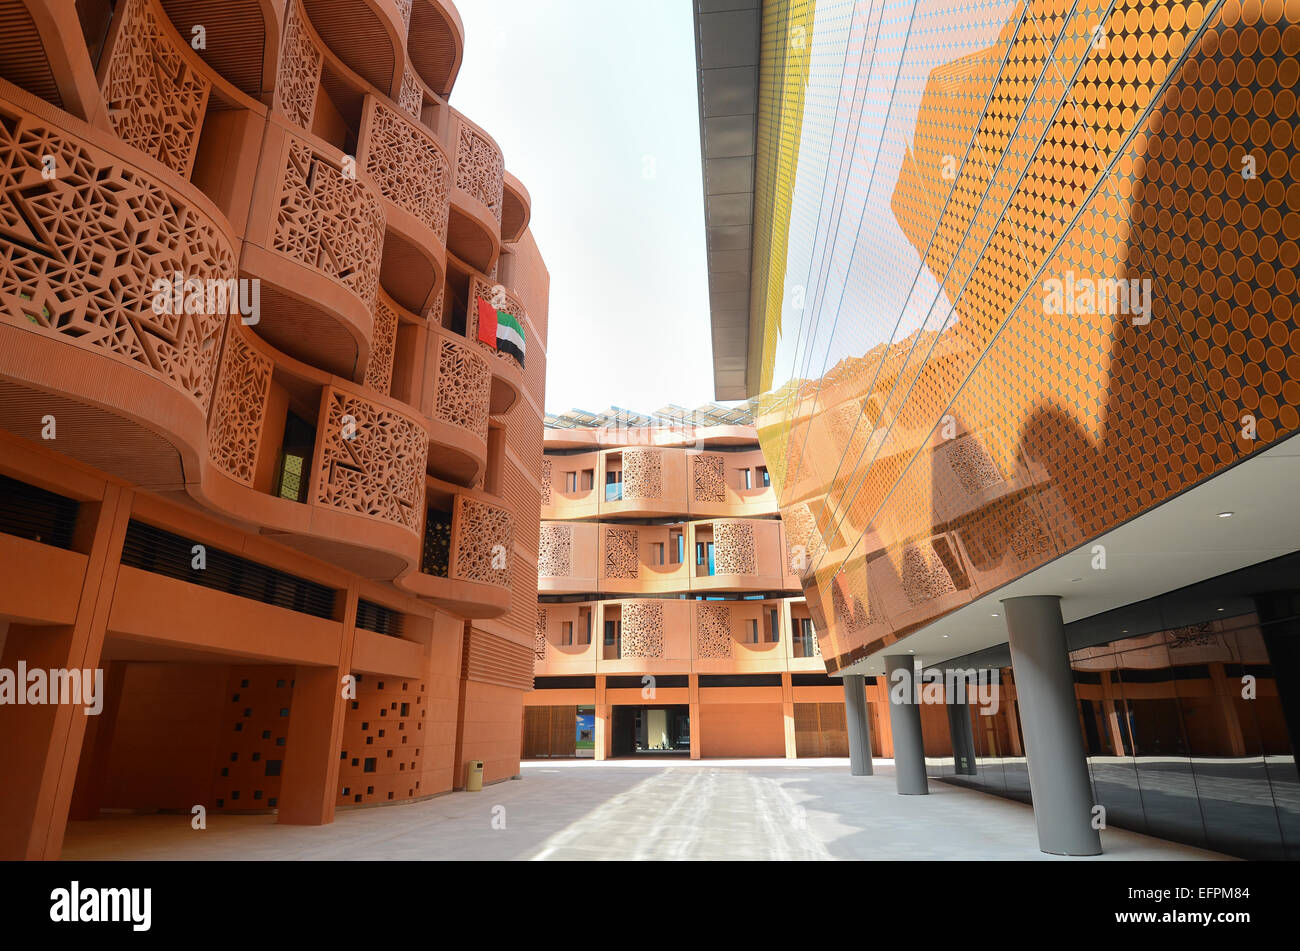 Masdar City in Abu Dhabi, UAE, described as 'one of the most sustainable communities on the planet.' Stock Photo